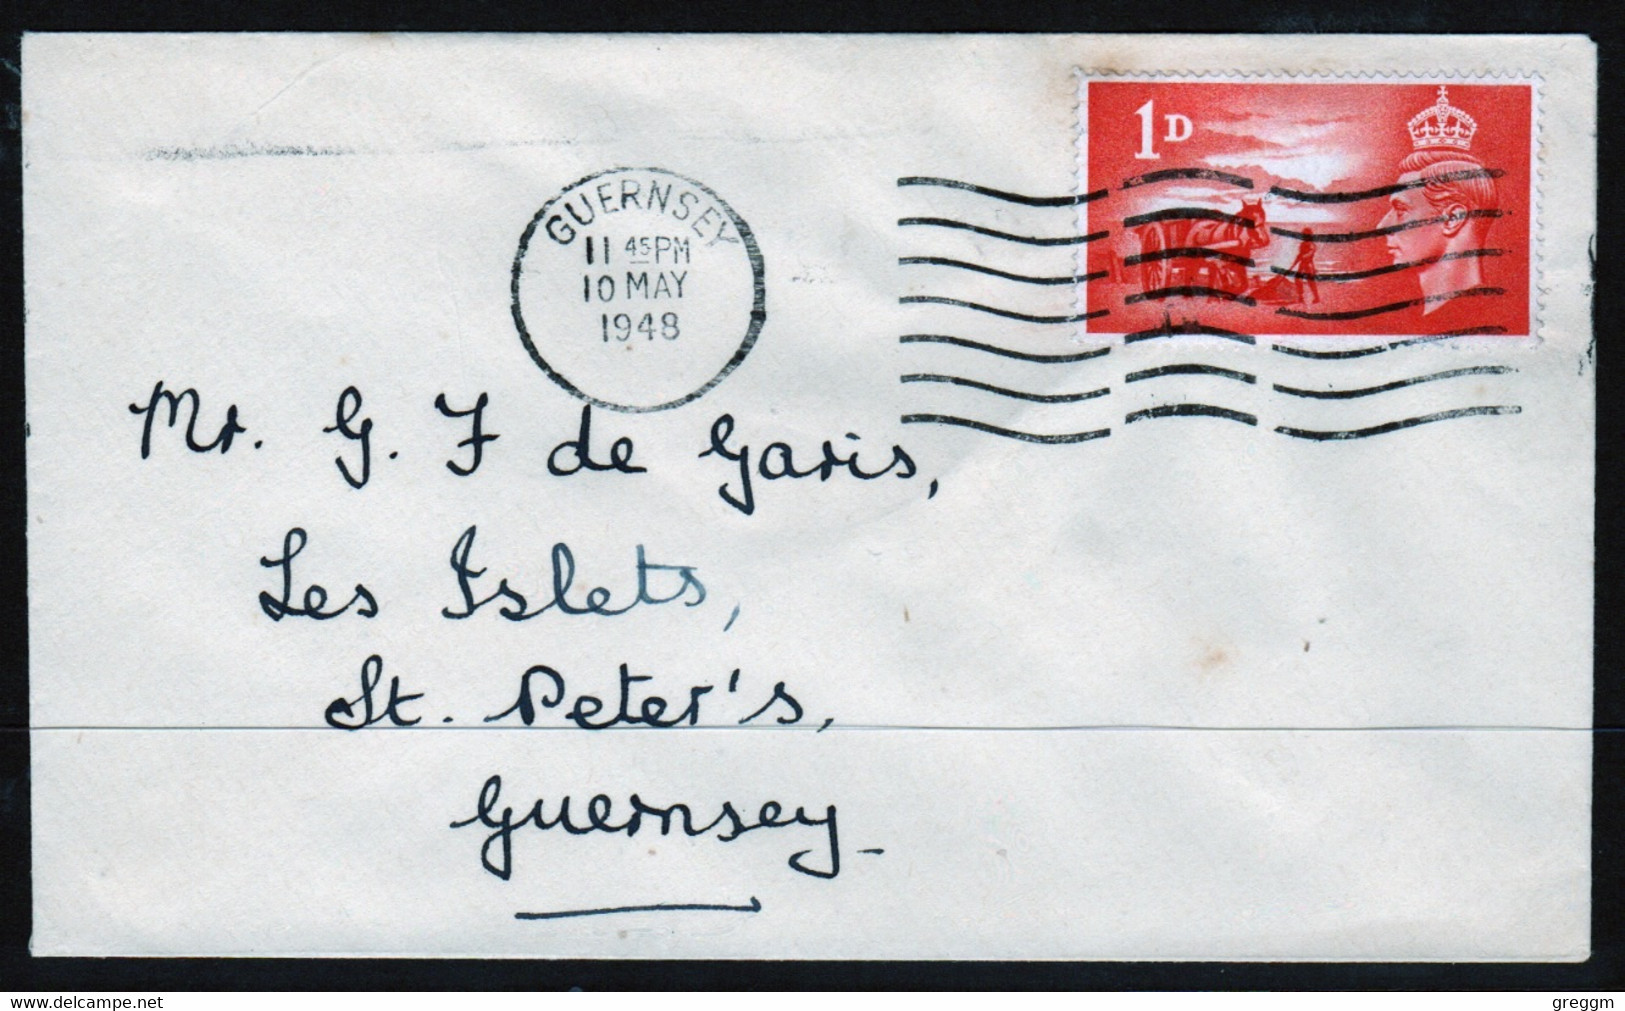 Channel Islands Regional Issue First Day Cover Envelope Only With One Value. - Sin Clasificación